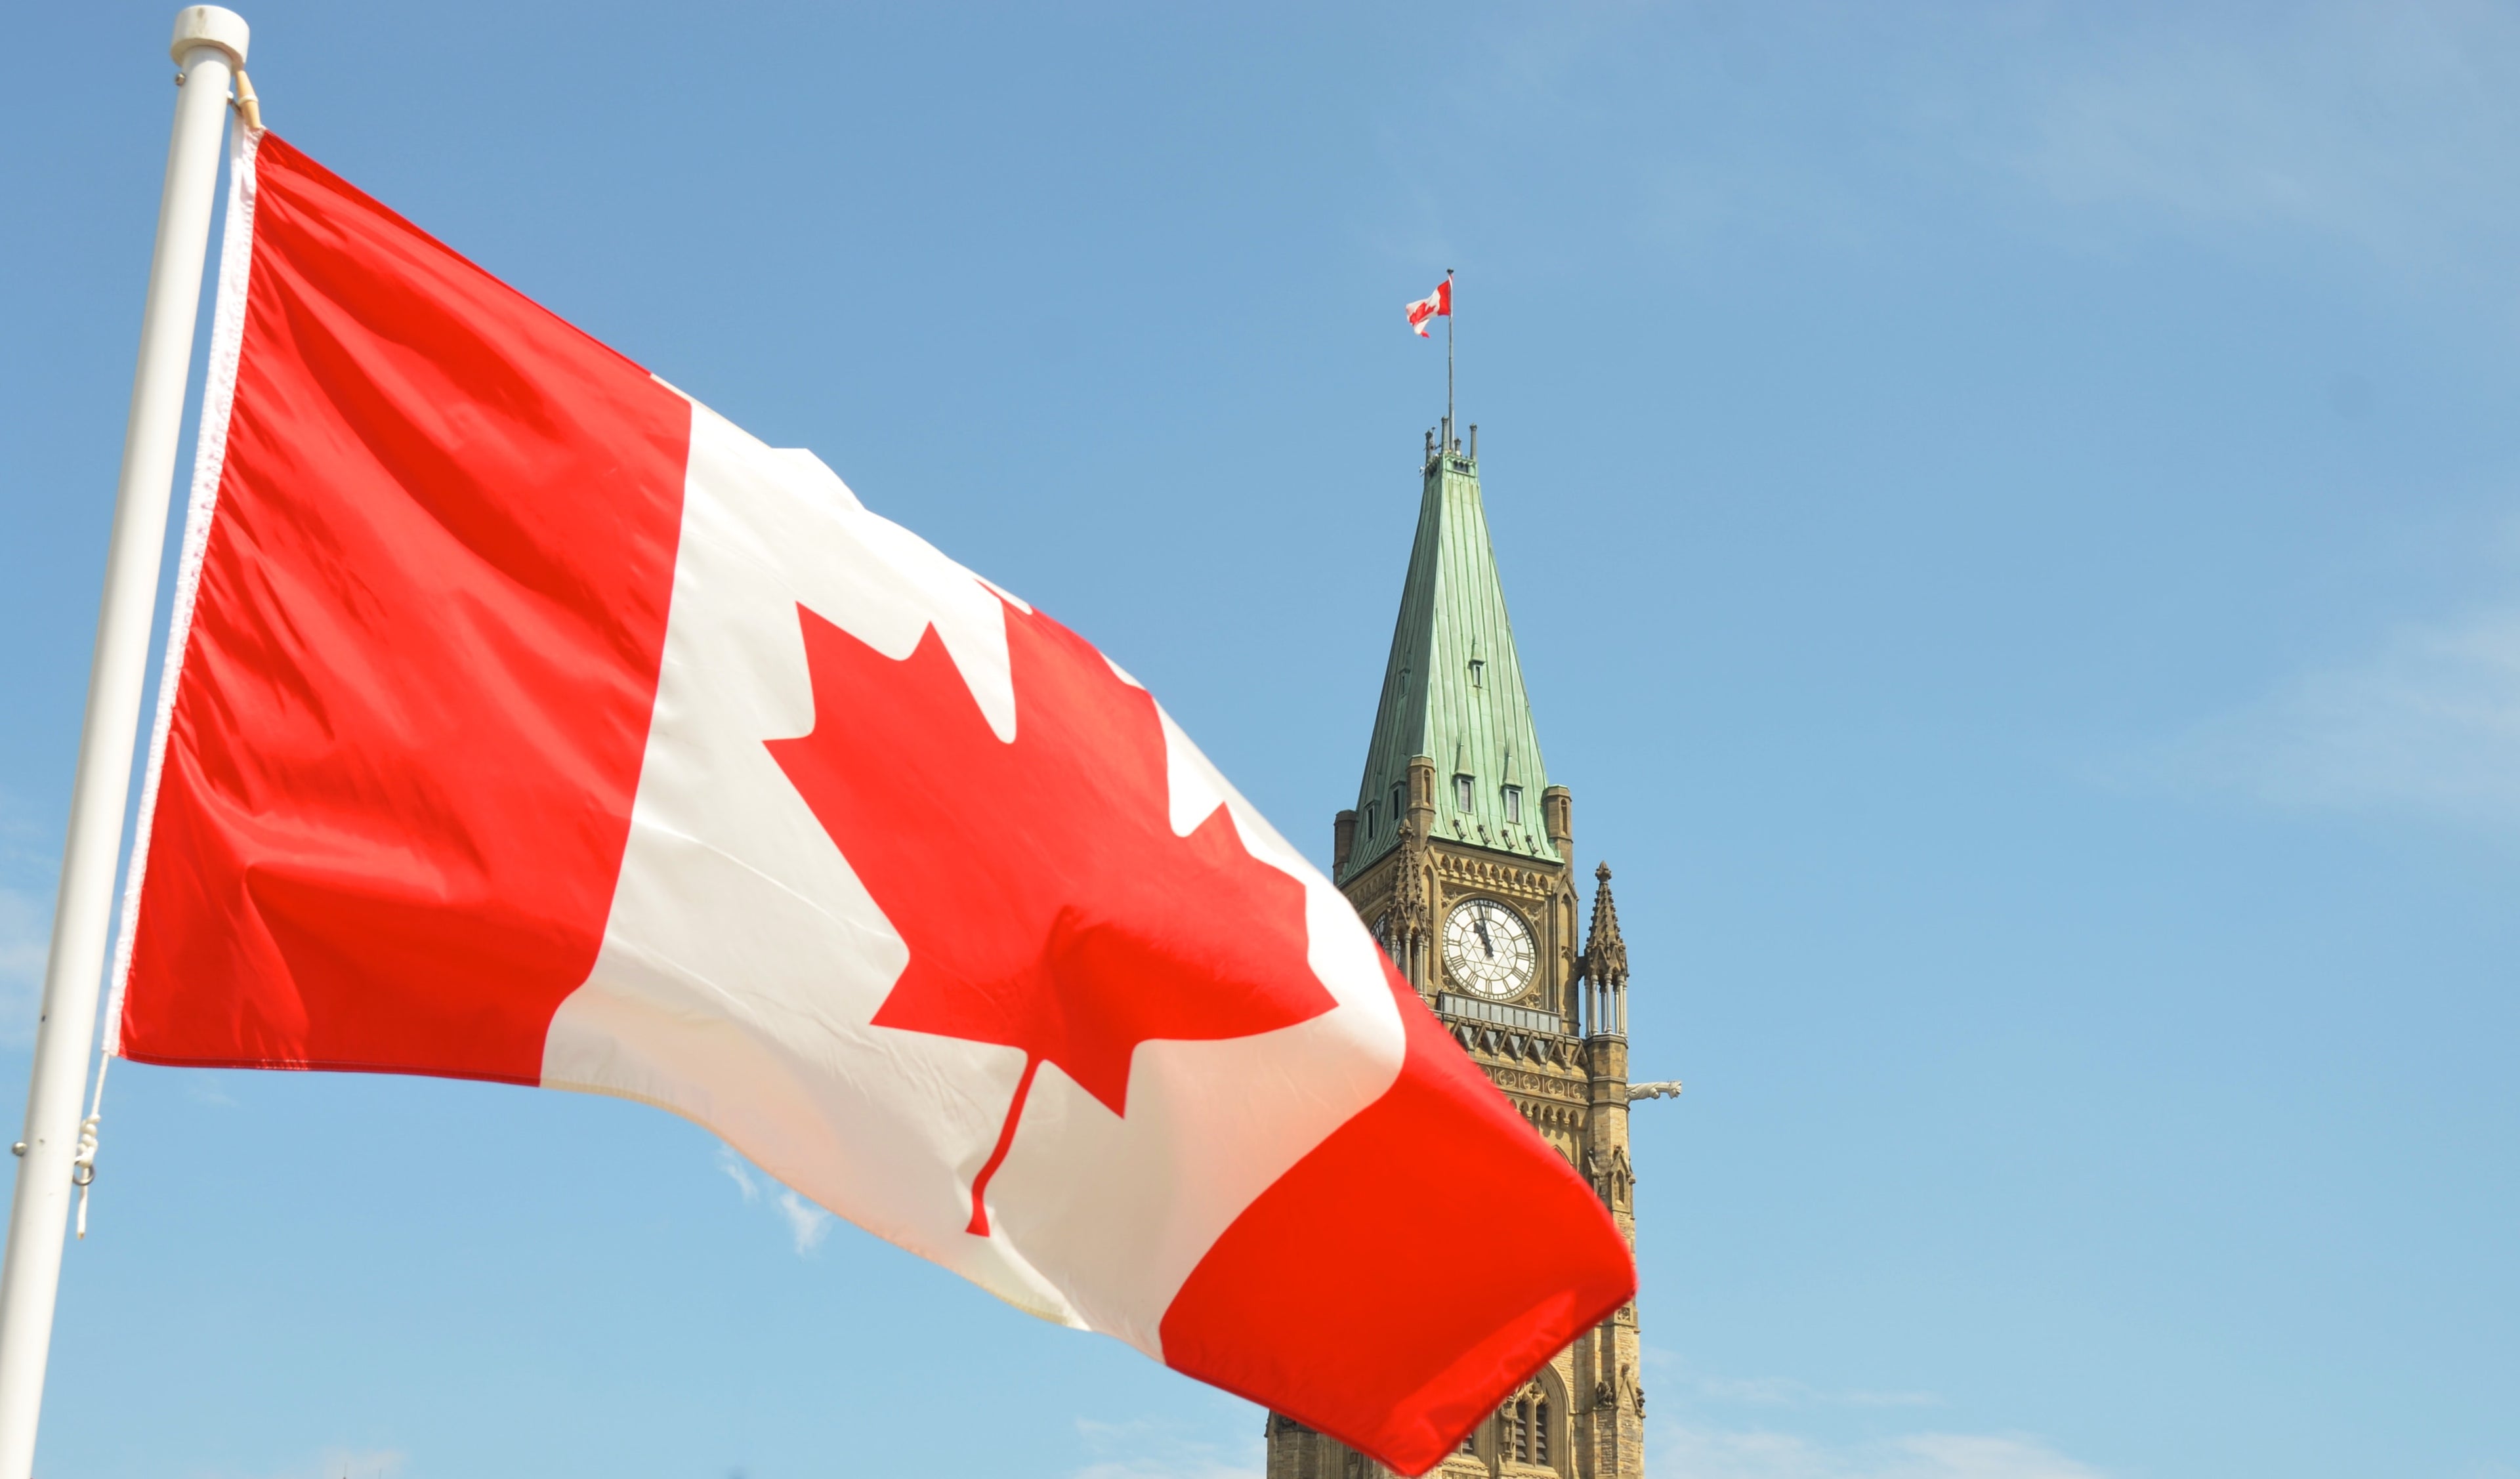 This is a picture of the canadian flag